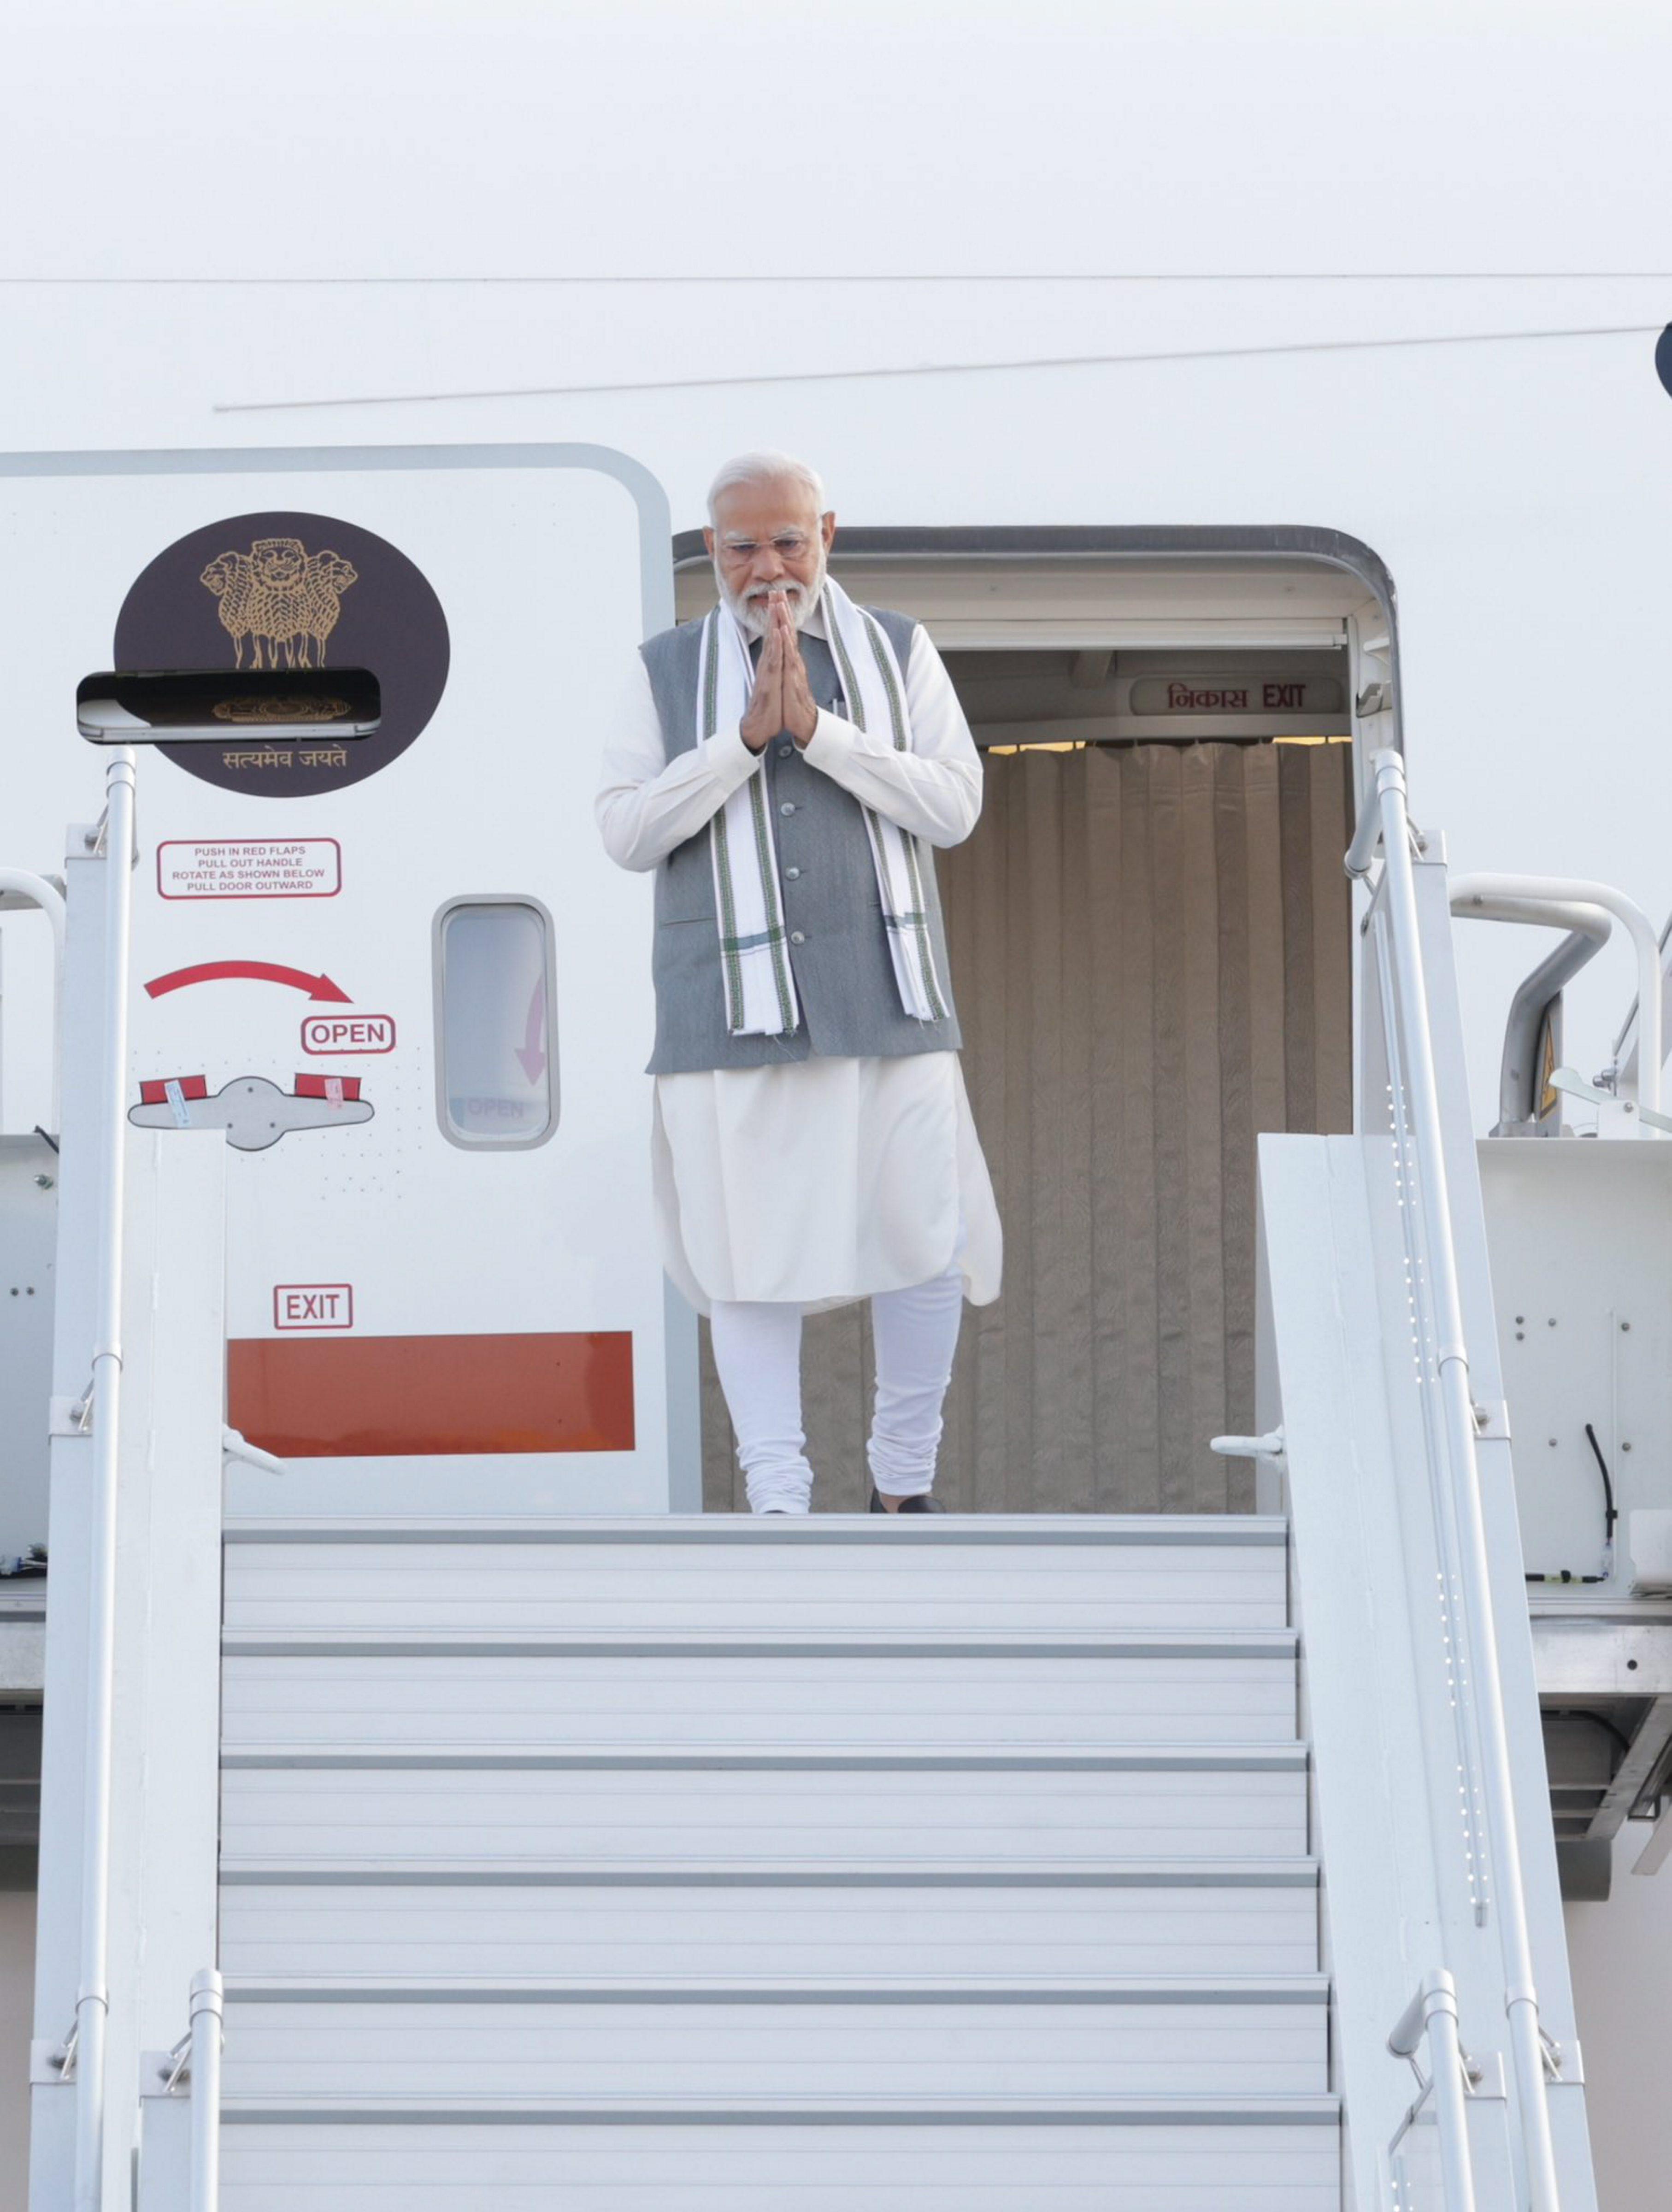 PM Modi arrived in Athens from South Africa where he attended the 15th BRICS Summit and held bilateral meetings with several world leaders to further cement India's relations with those countries